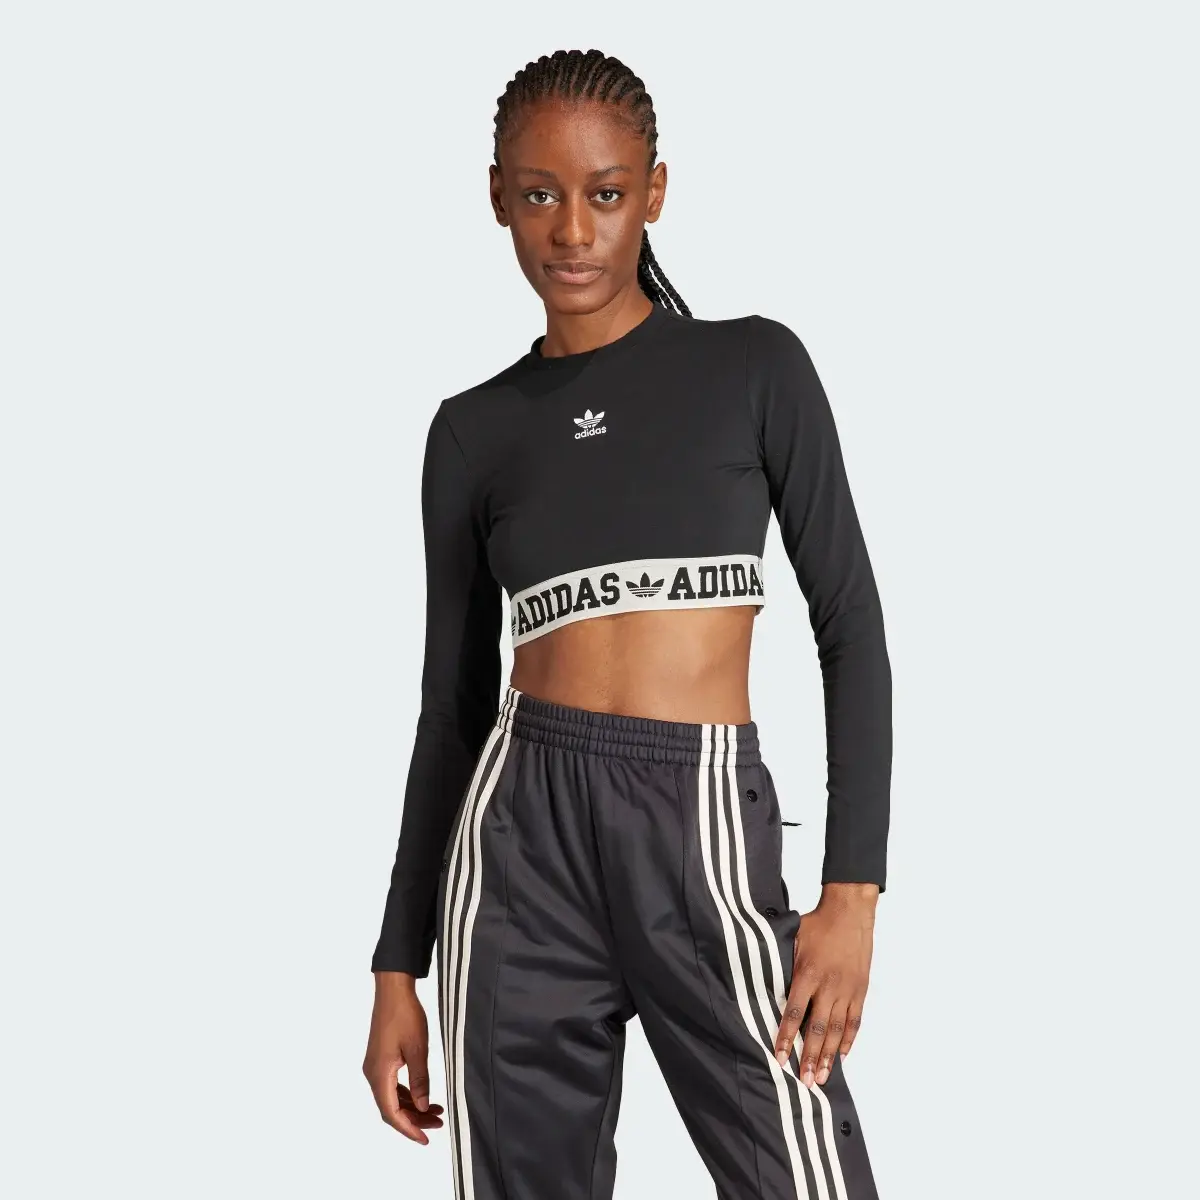 Adidas Neutral Court Graphic Long Sleeve T-Shirt. 2